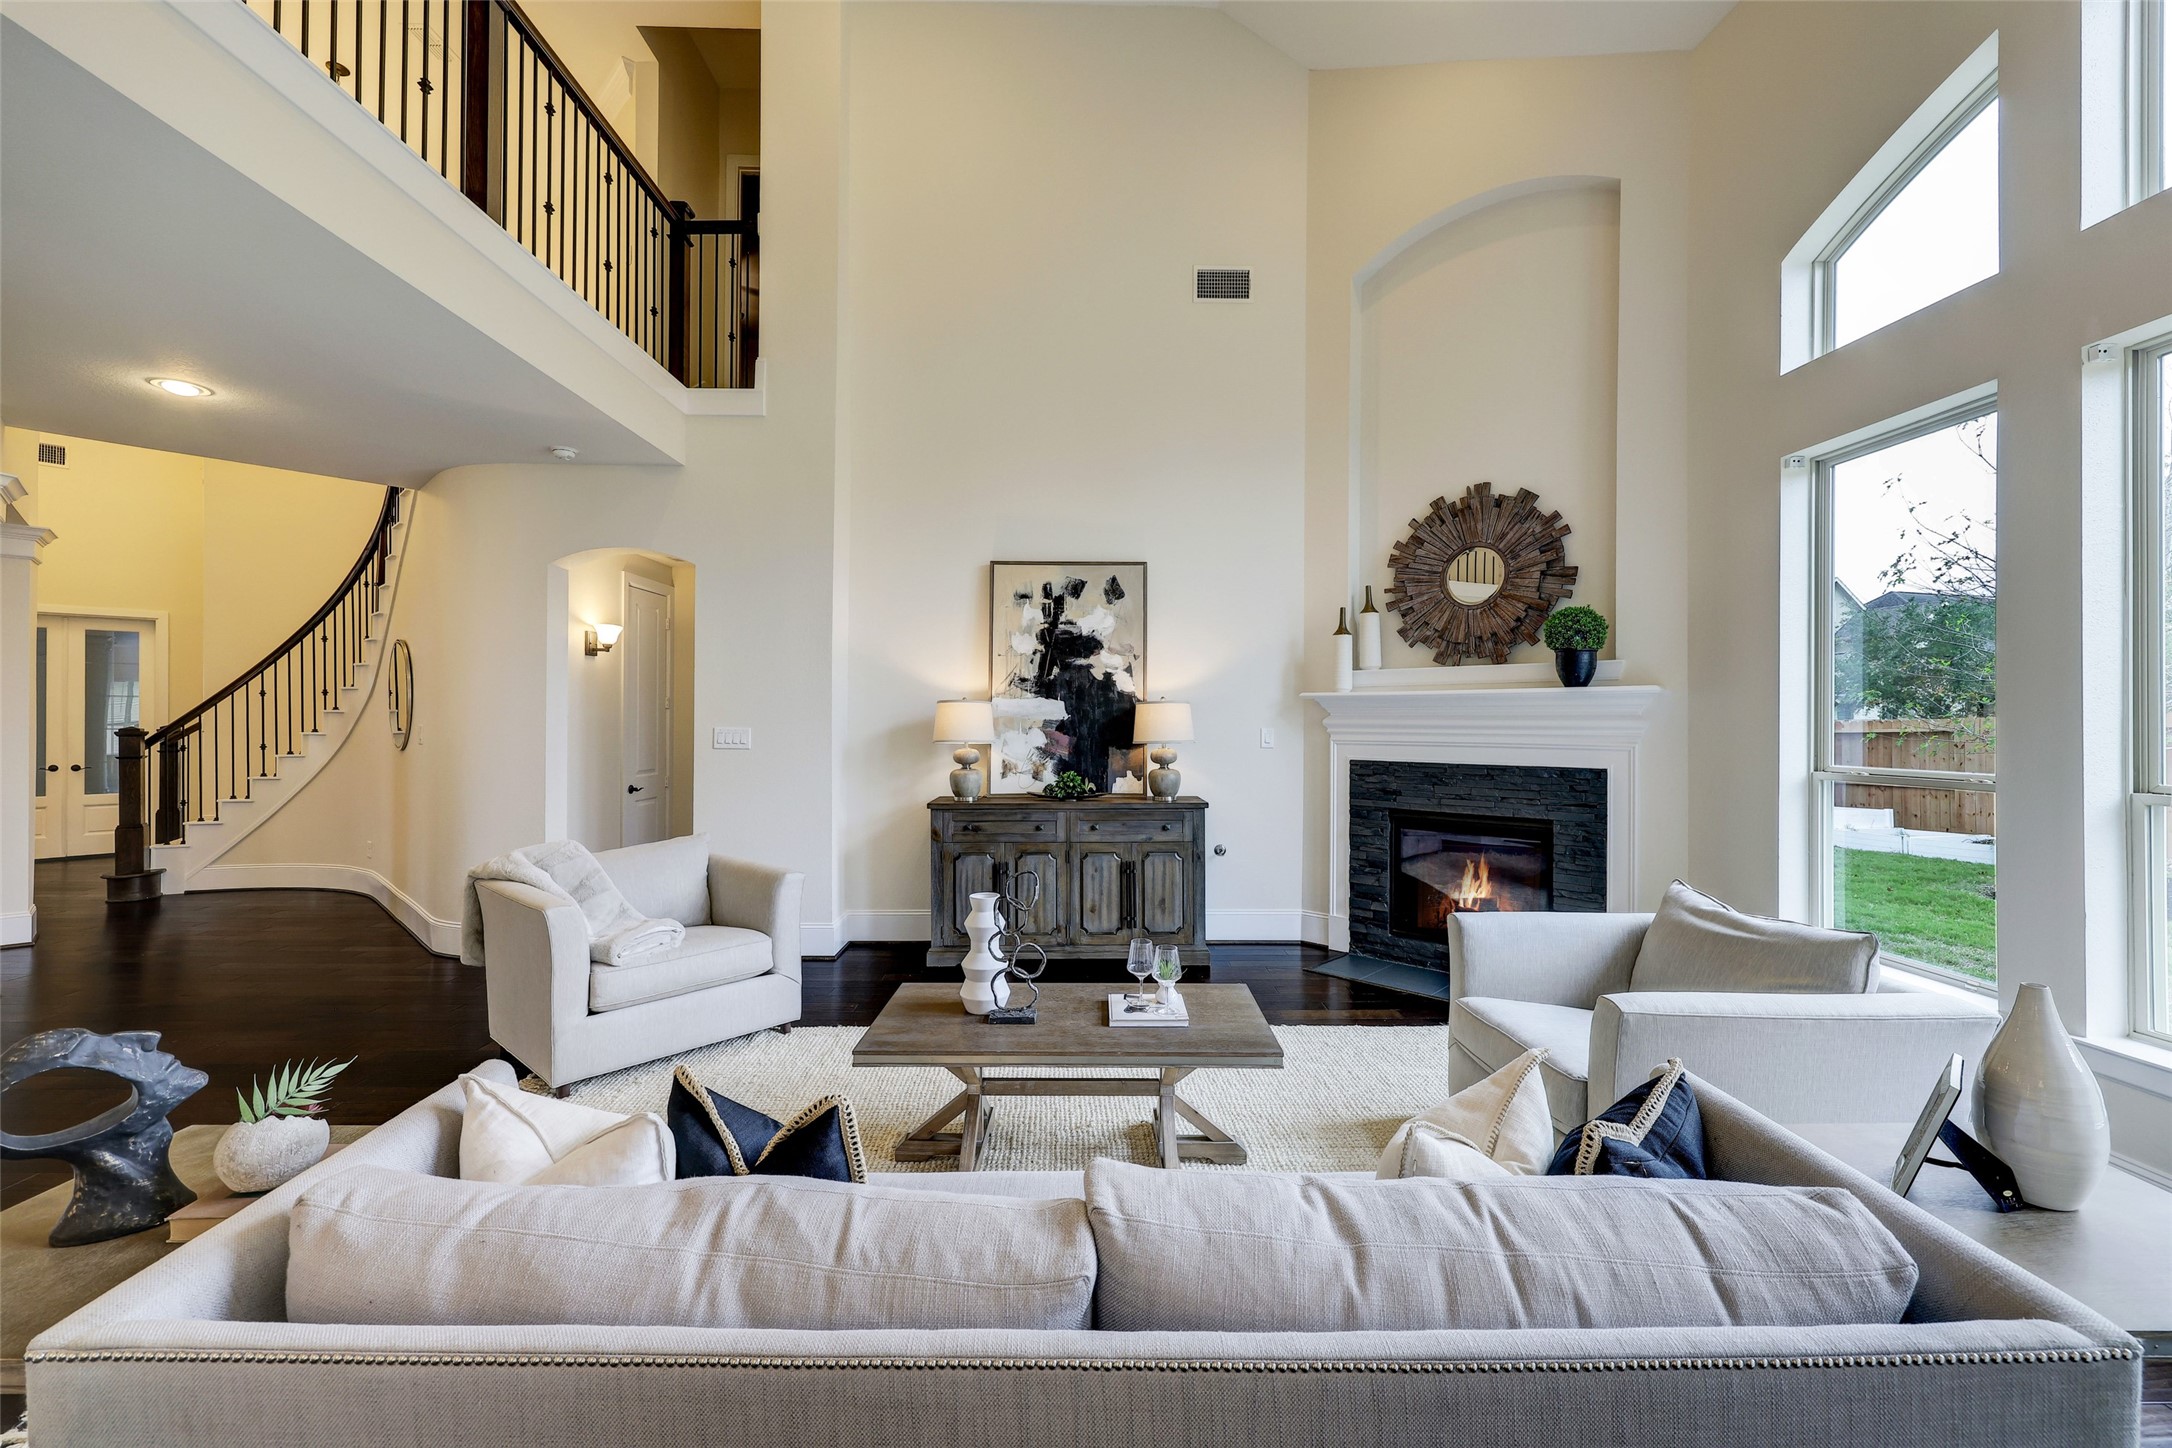 Architecturally interesting niches mimic the tall 2-story window and carry throughout the living room, with an elegant fireplace mantel at its helm.